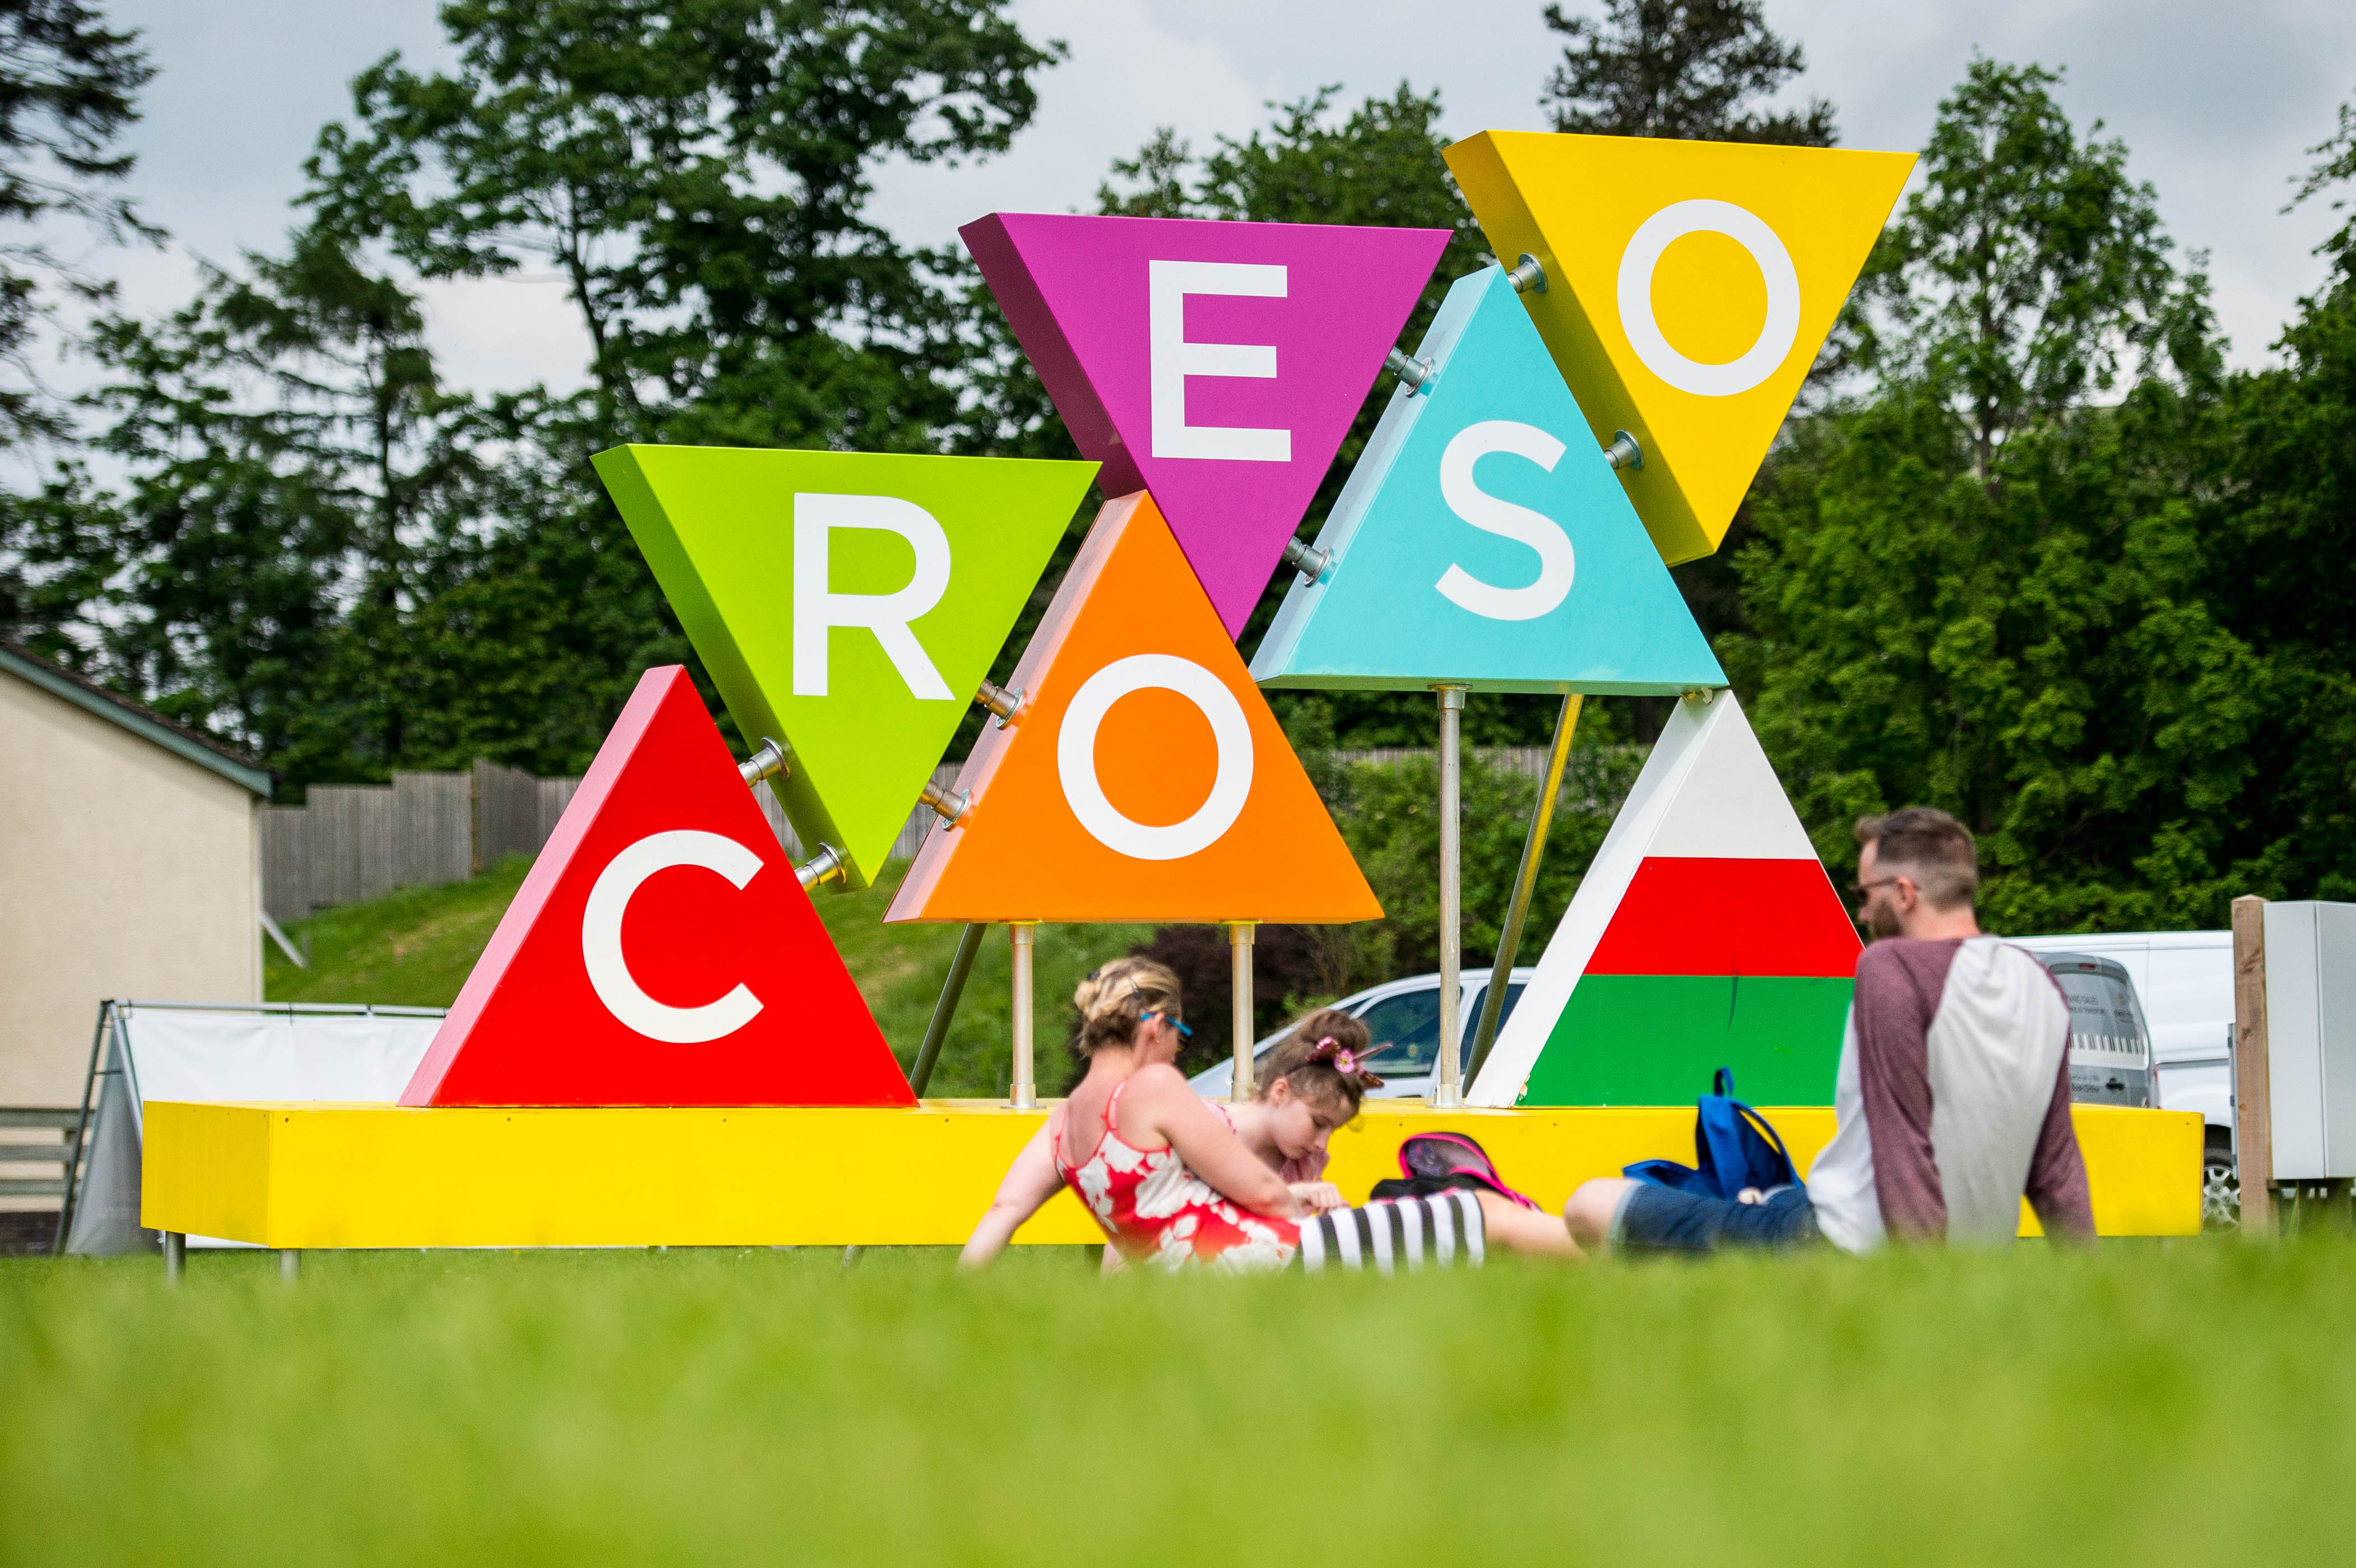 Entry to 2022 Urdd National Eisteddfod will be free!